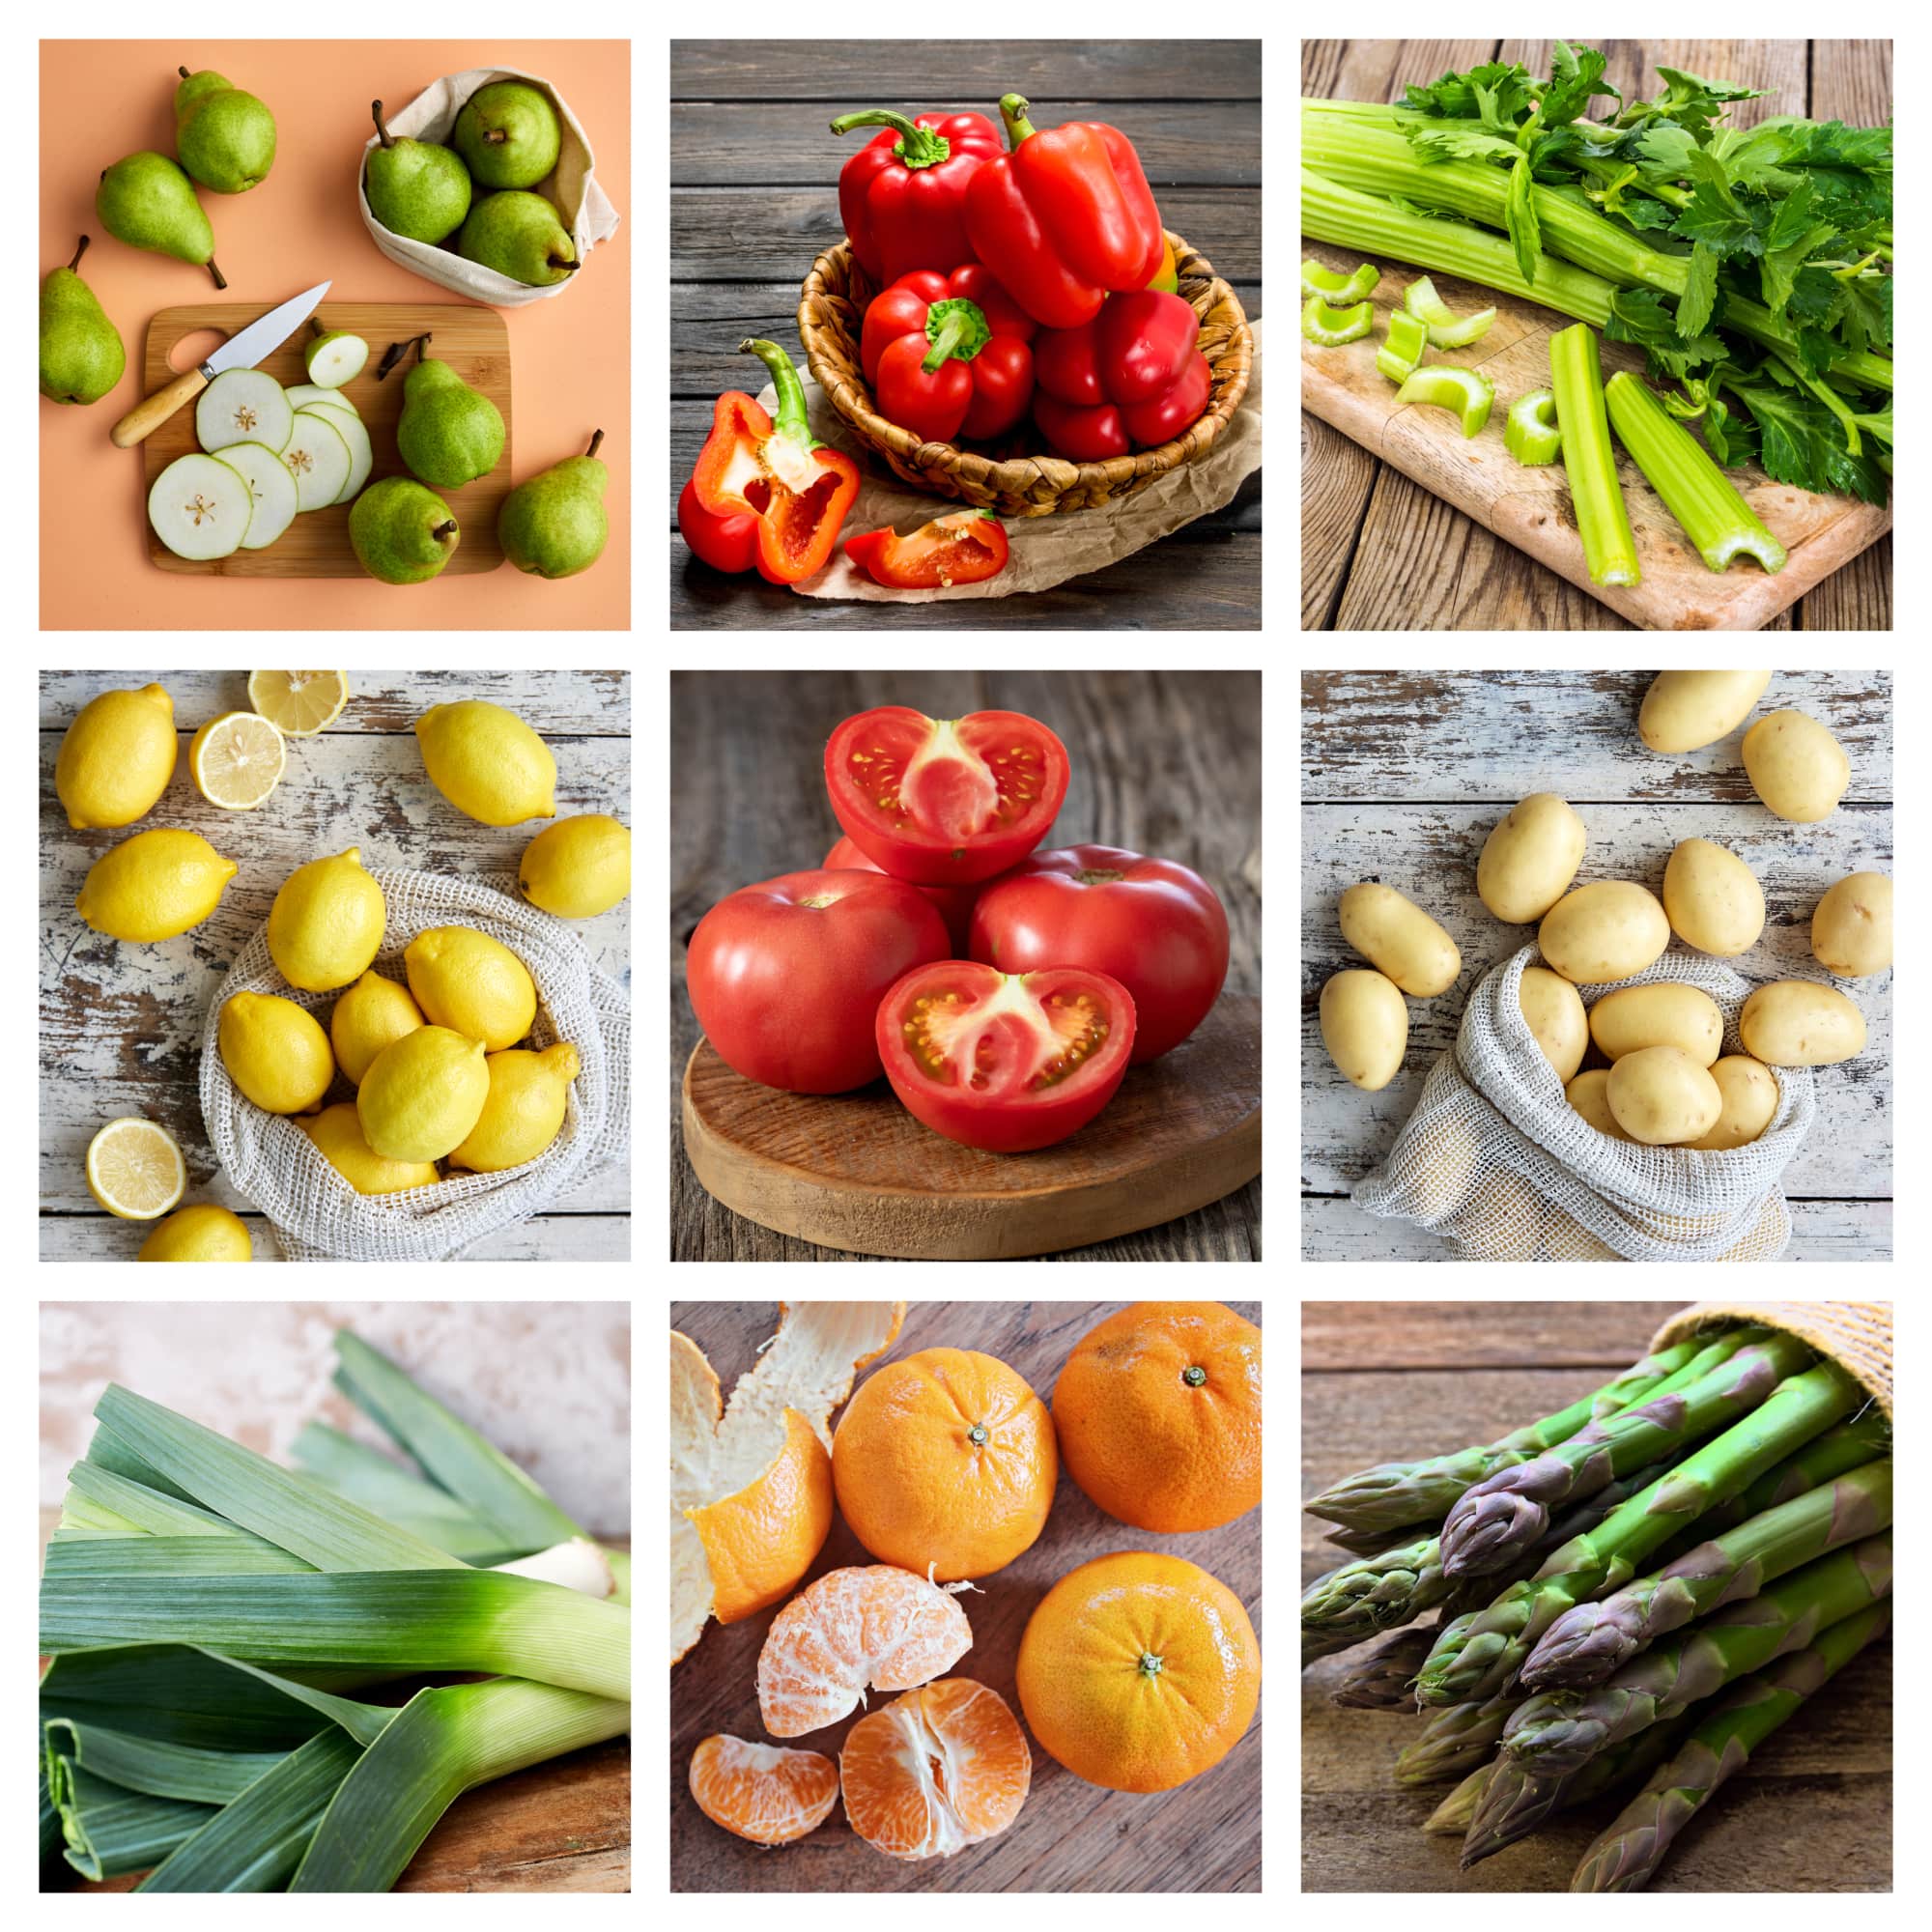 Dave's Market Update for the 21st of June 2023 includes imperfect pears, red capsicums, celery, lemons, Queensland field tomatoes, washed potatoes, leeks, Queensland mandarins, and imported asparagus.